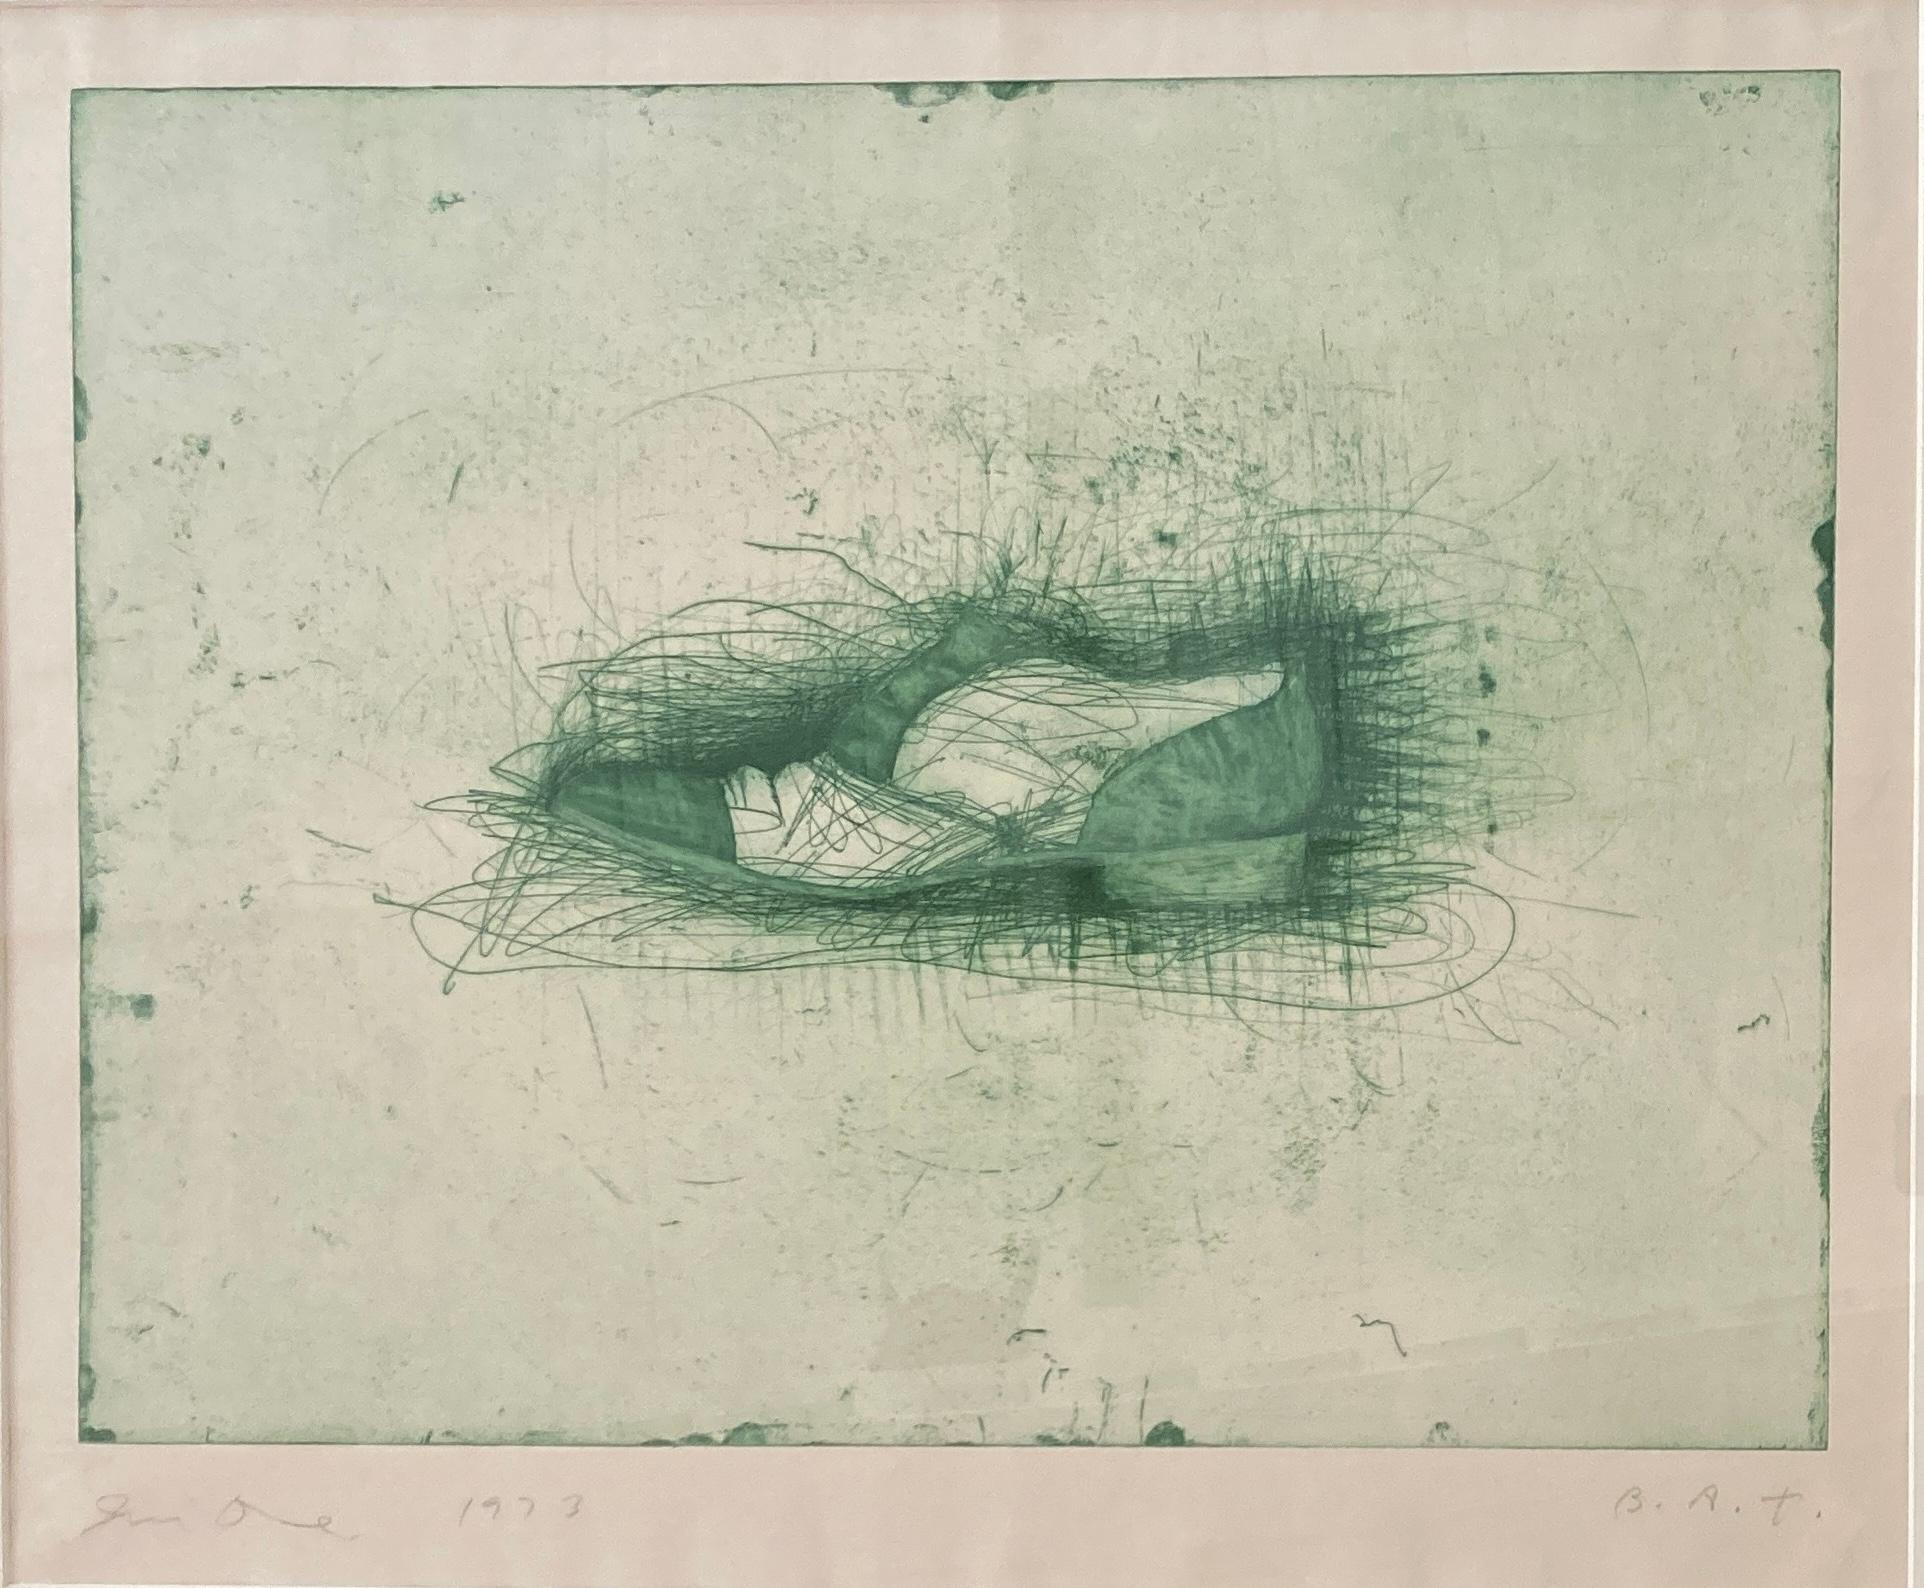 Jim Dine (American, born 1935)
Shoe (second state of 3) (WC.104), 1973
Color etching on Japanese laid paper
Signed in pencil
Dated and annotated 'B.A.T.' (bon a tirer), aside from the edition of 30 
Published/printed by Petersburg Press/Hartmut